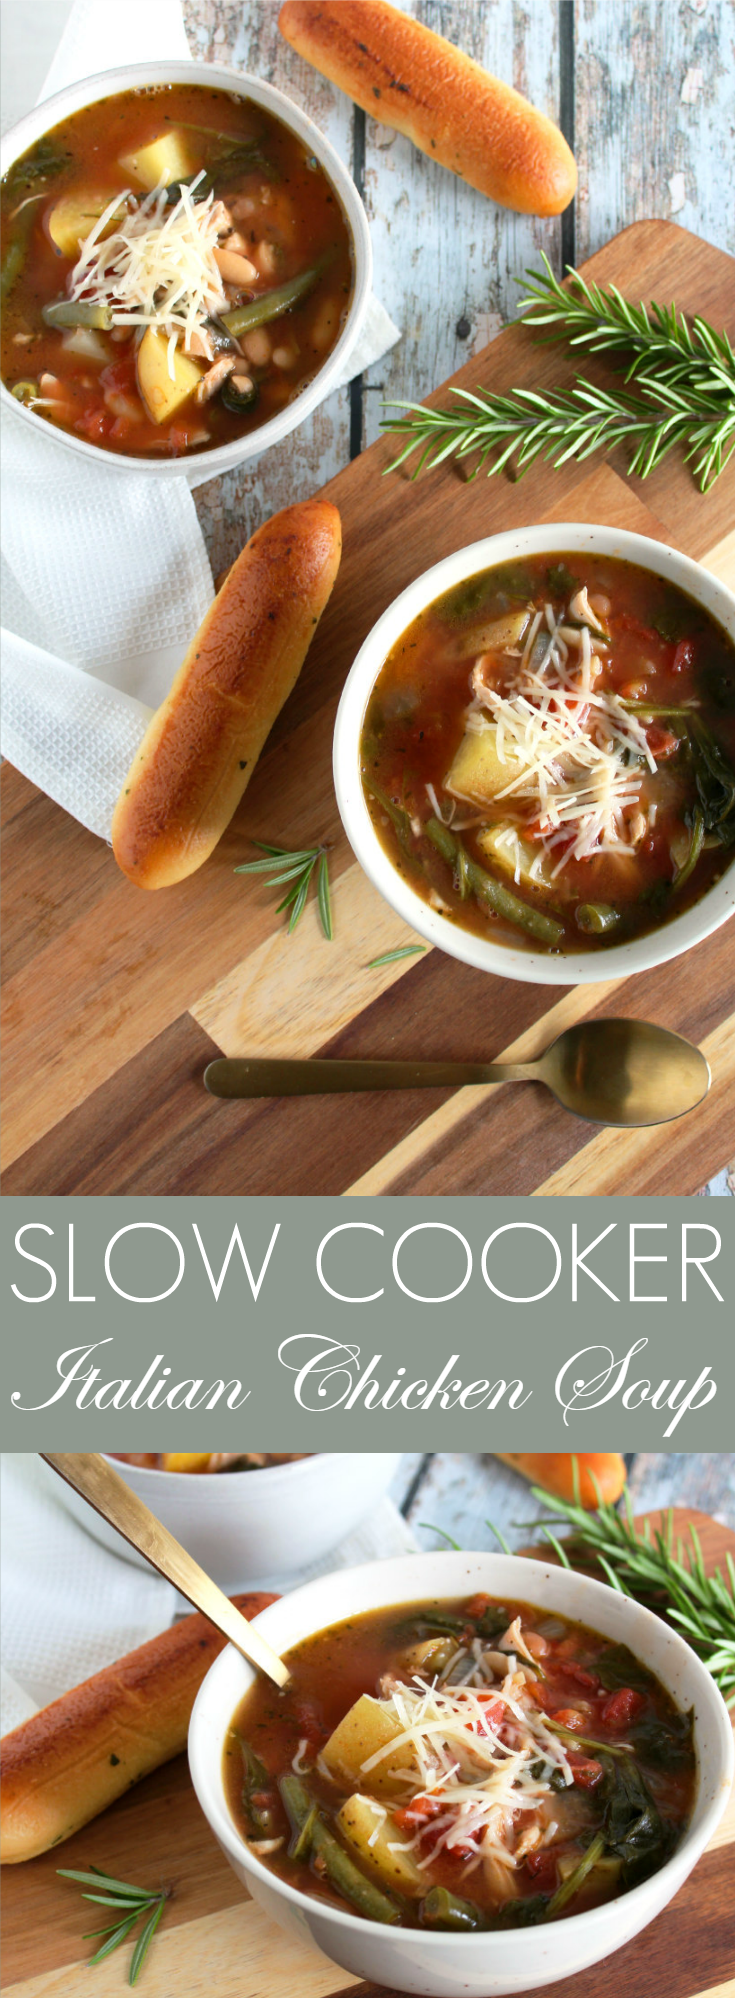 Nothing beats comfort food on a chilly evening, and chicken soup is always a winner! Come home to this Slow Cooker Italian Chicken Soup for your weeknight dinner. It's your new favorite easy slow cooker soup!